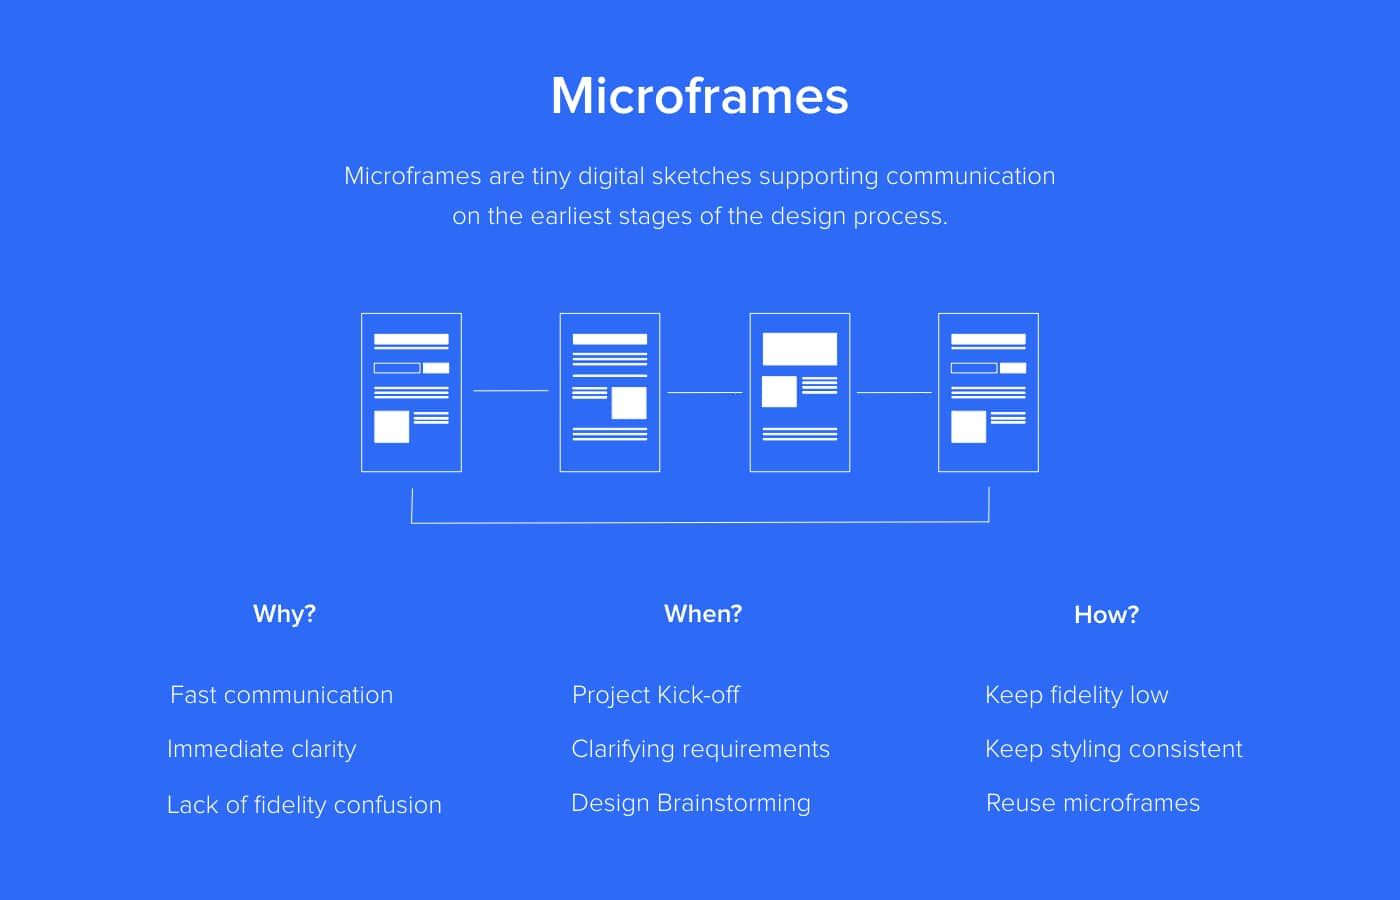 The Next Generation Wireframes are Microframes